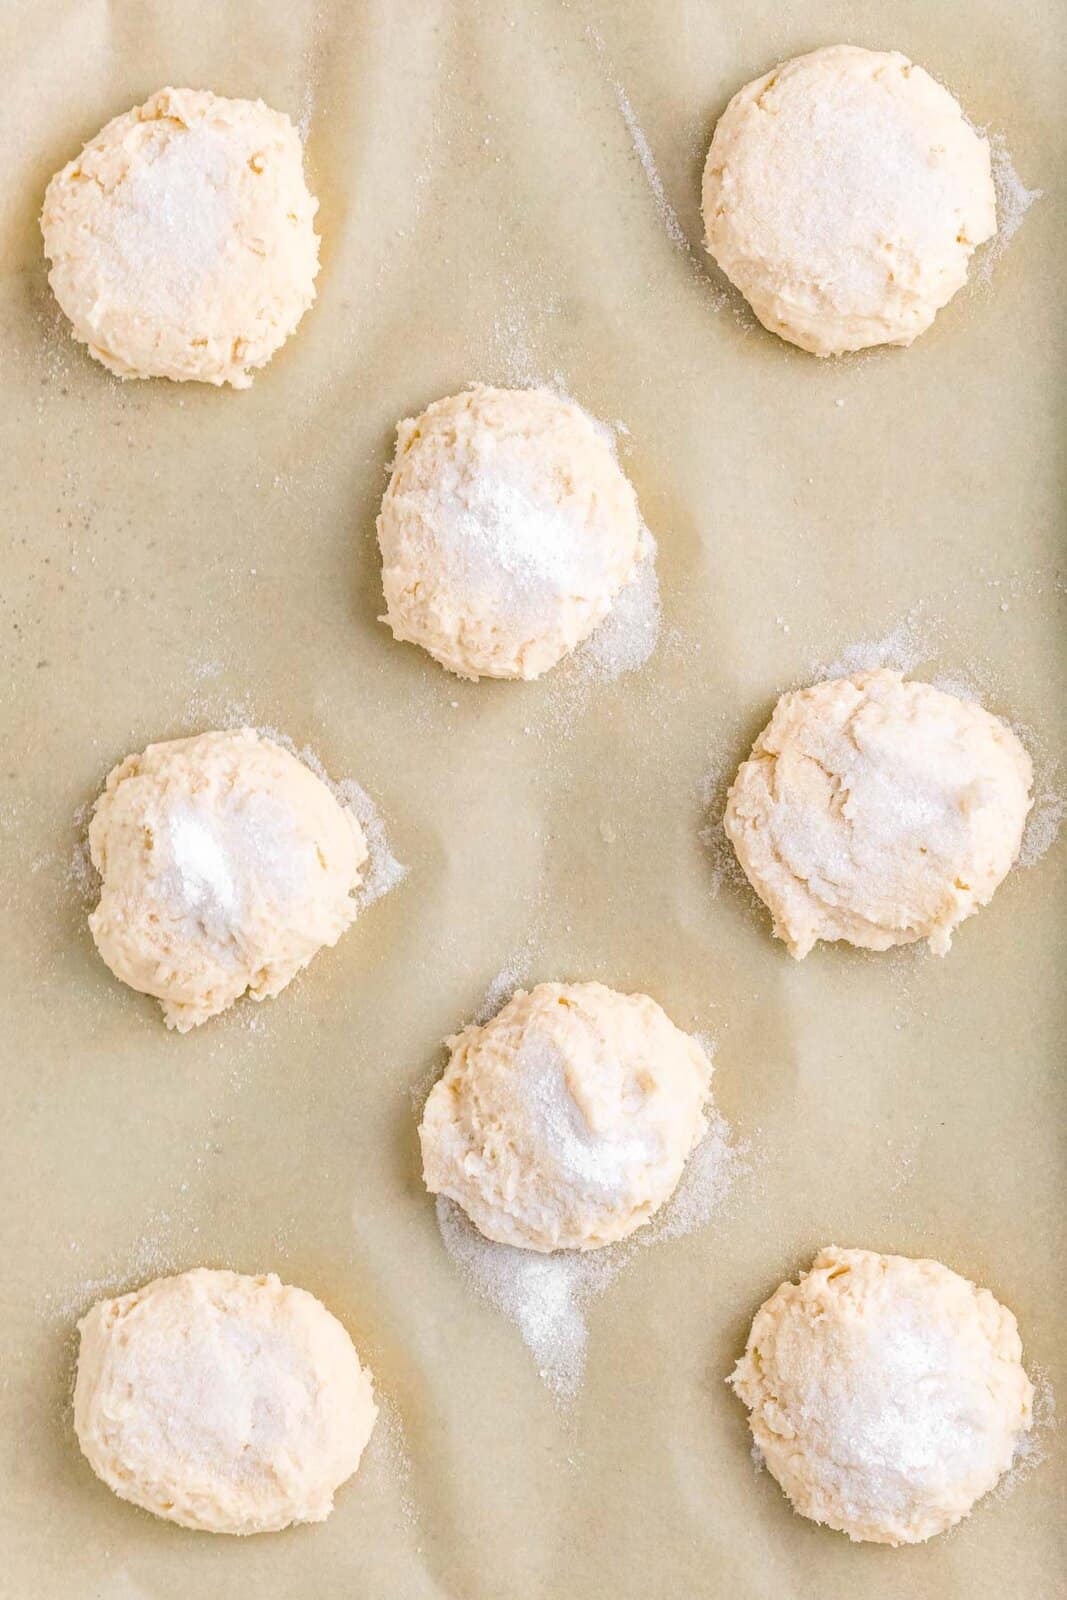 biscuit dough sprinkled with granulated sugar.